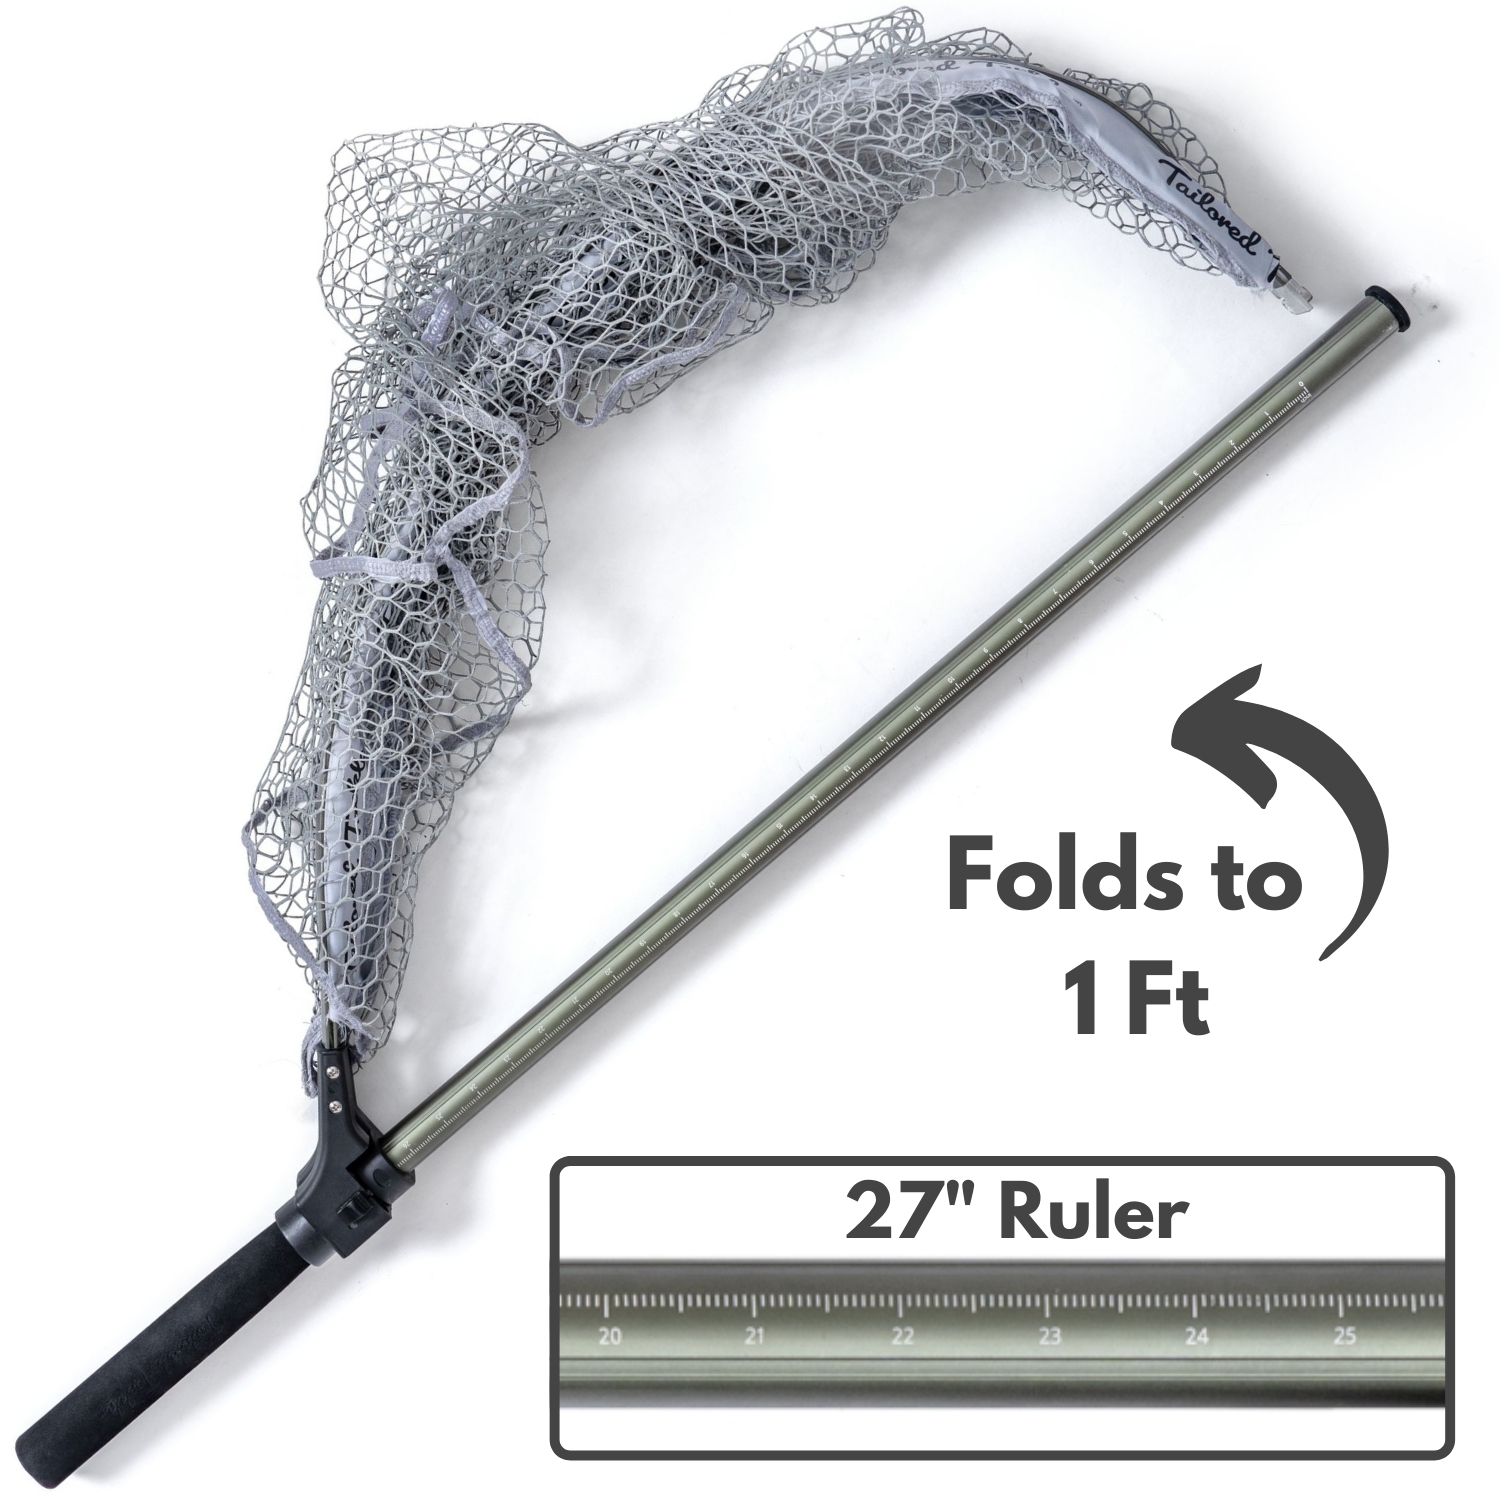 Floating Fishing Net, Fishing Landing Net with Foldable Collapsible  Telescopic Pole Handle, Rubber Coated Mesh Folding Fly Fish Net for Bass  Trout